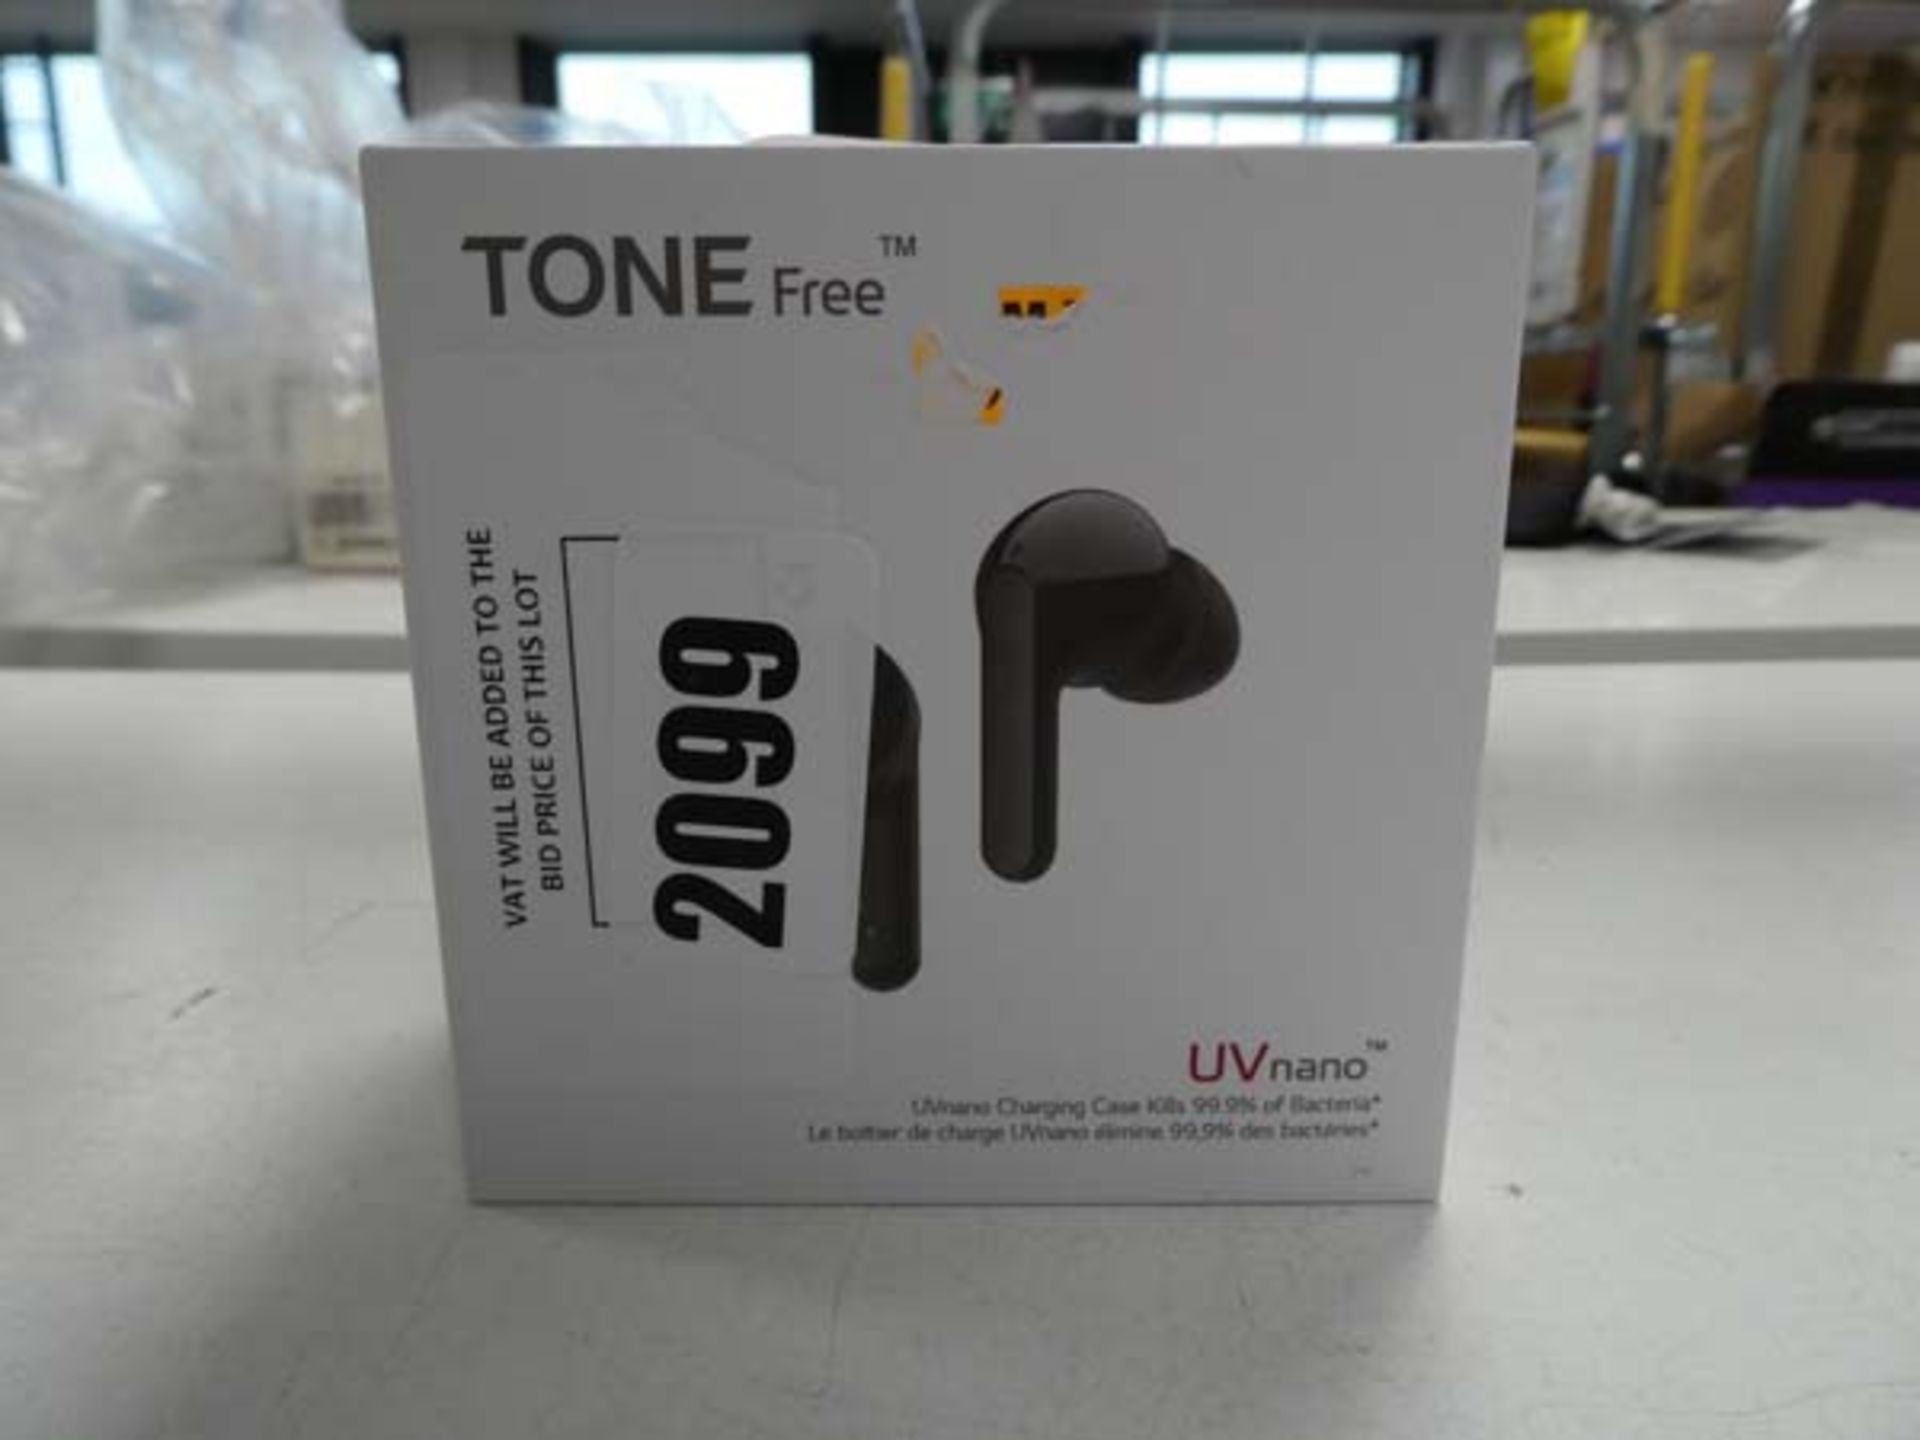 Pair of LG Tone Free UV Nano wireless earbuds with charging case - Image 2 of 2